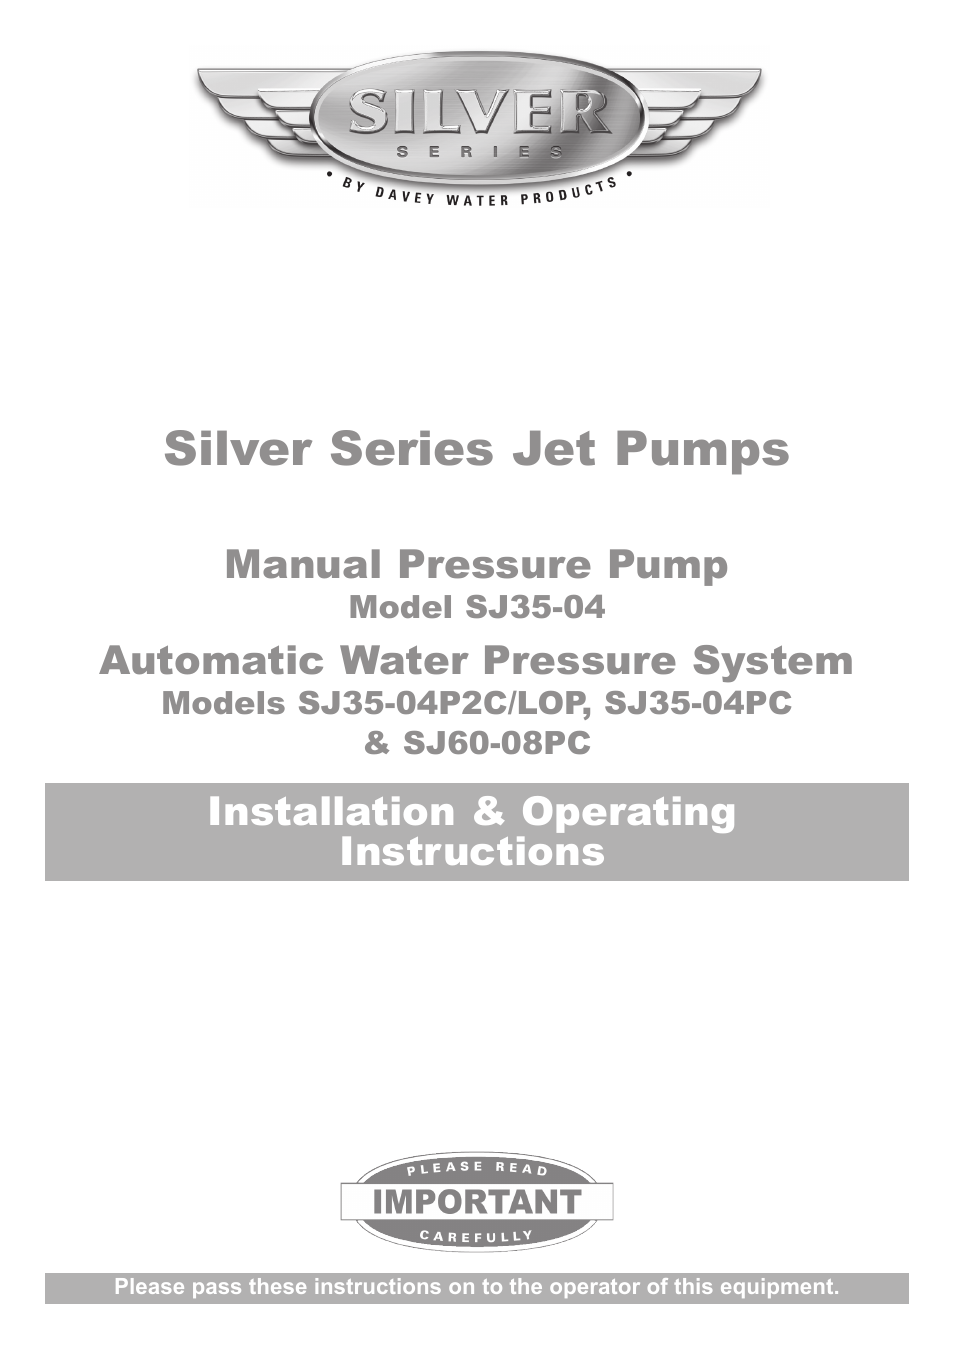 SJ60-08PC Automatic Water Pressure System